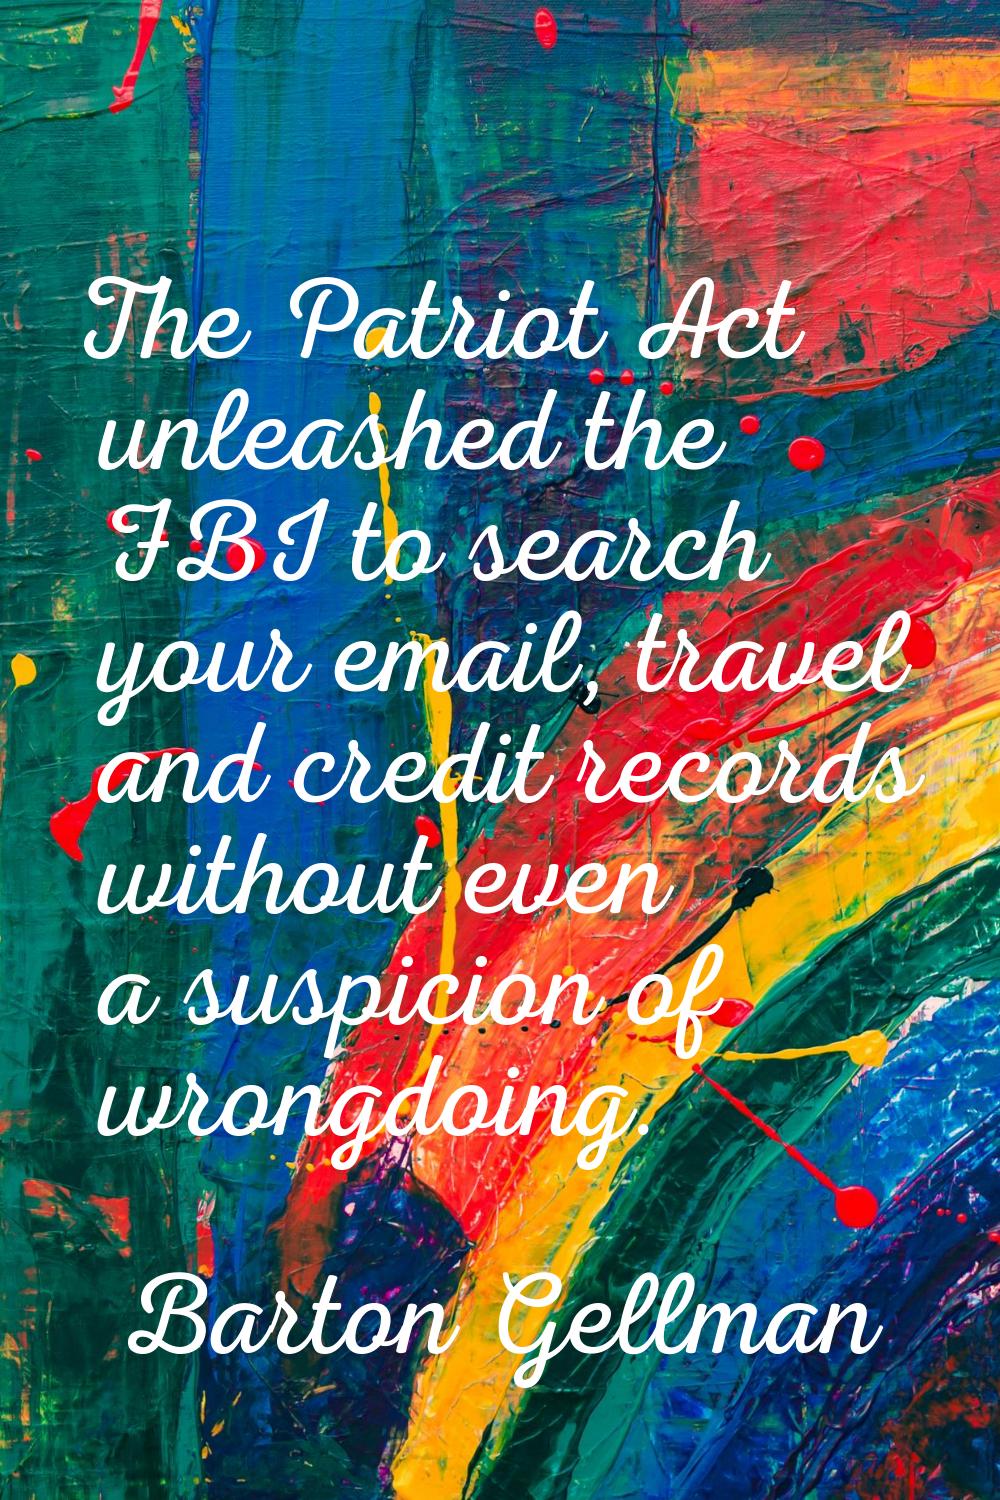 The Patriot Act unleashed the FBI to search your email, travel and credit records without even a su